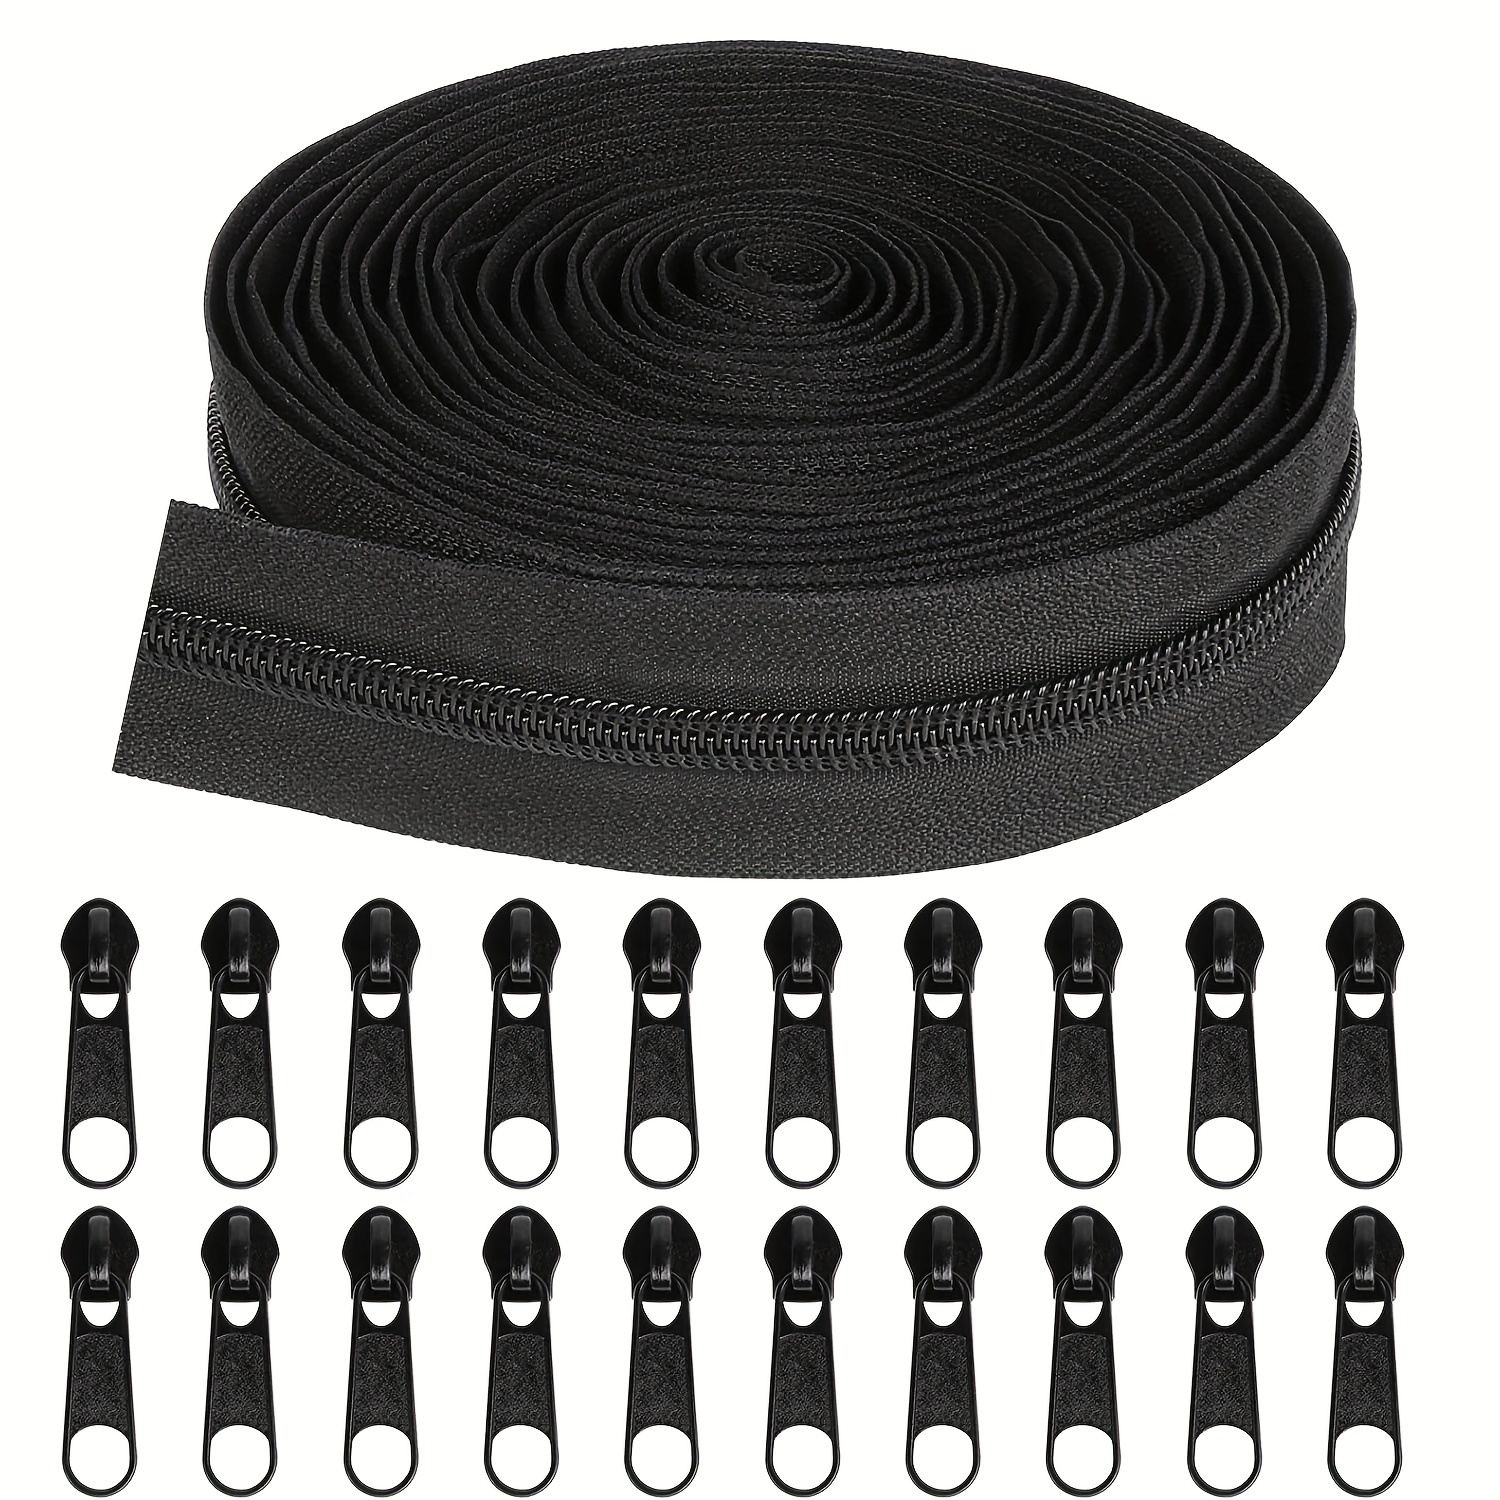 

5yards Bulk Zipper #5 Zippers For Sewing, Black Nylon Coil Zipper By The Yards Replacement Sewing Zipper With 20pcs Zipper Sliders For Diy Sewing Craft Bags